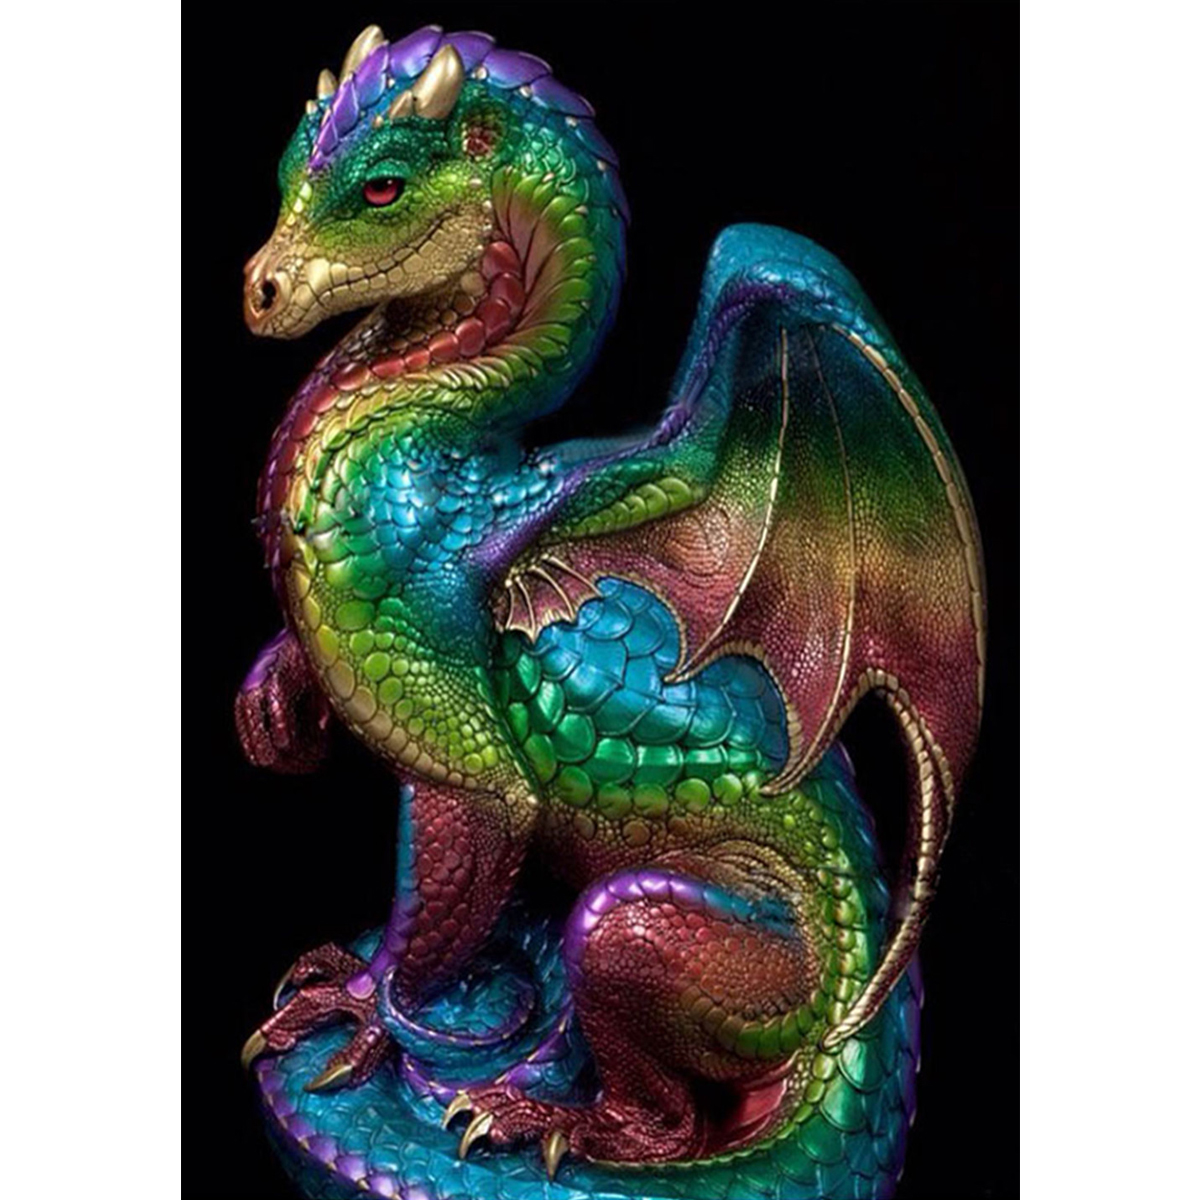 5D-DIY-Diamond-Painting-Dragon-Monster-Art-Craft-Kit-Handmade-Wall-Decorations-Gifts-for-Kids-Adult-1702867-1